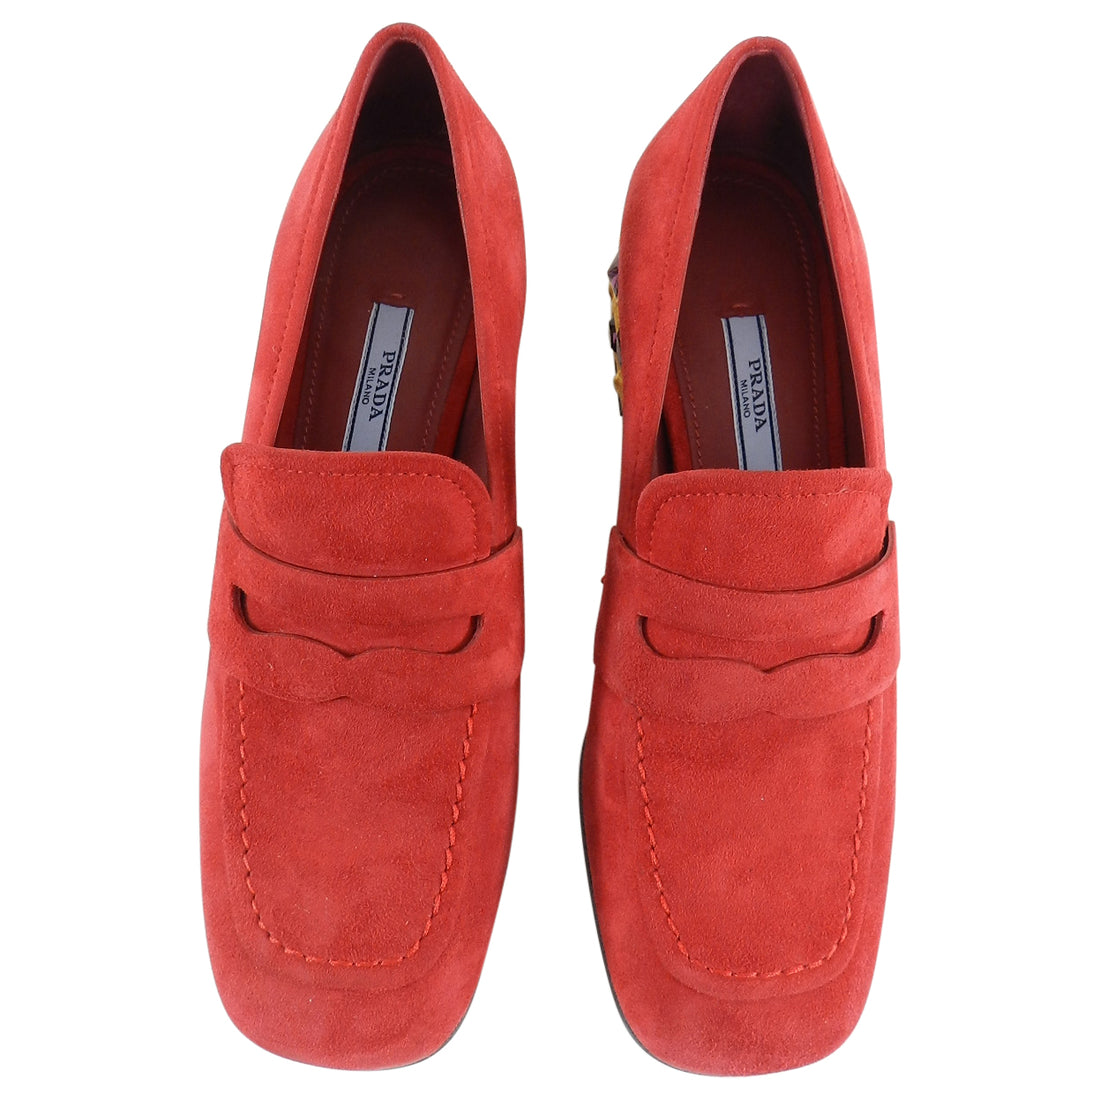 Prada Red Suede Loafer with Gold Metal Jewel Heels - 37.5 – I MISS YOU ...